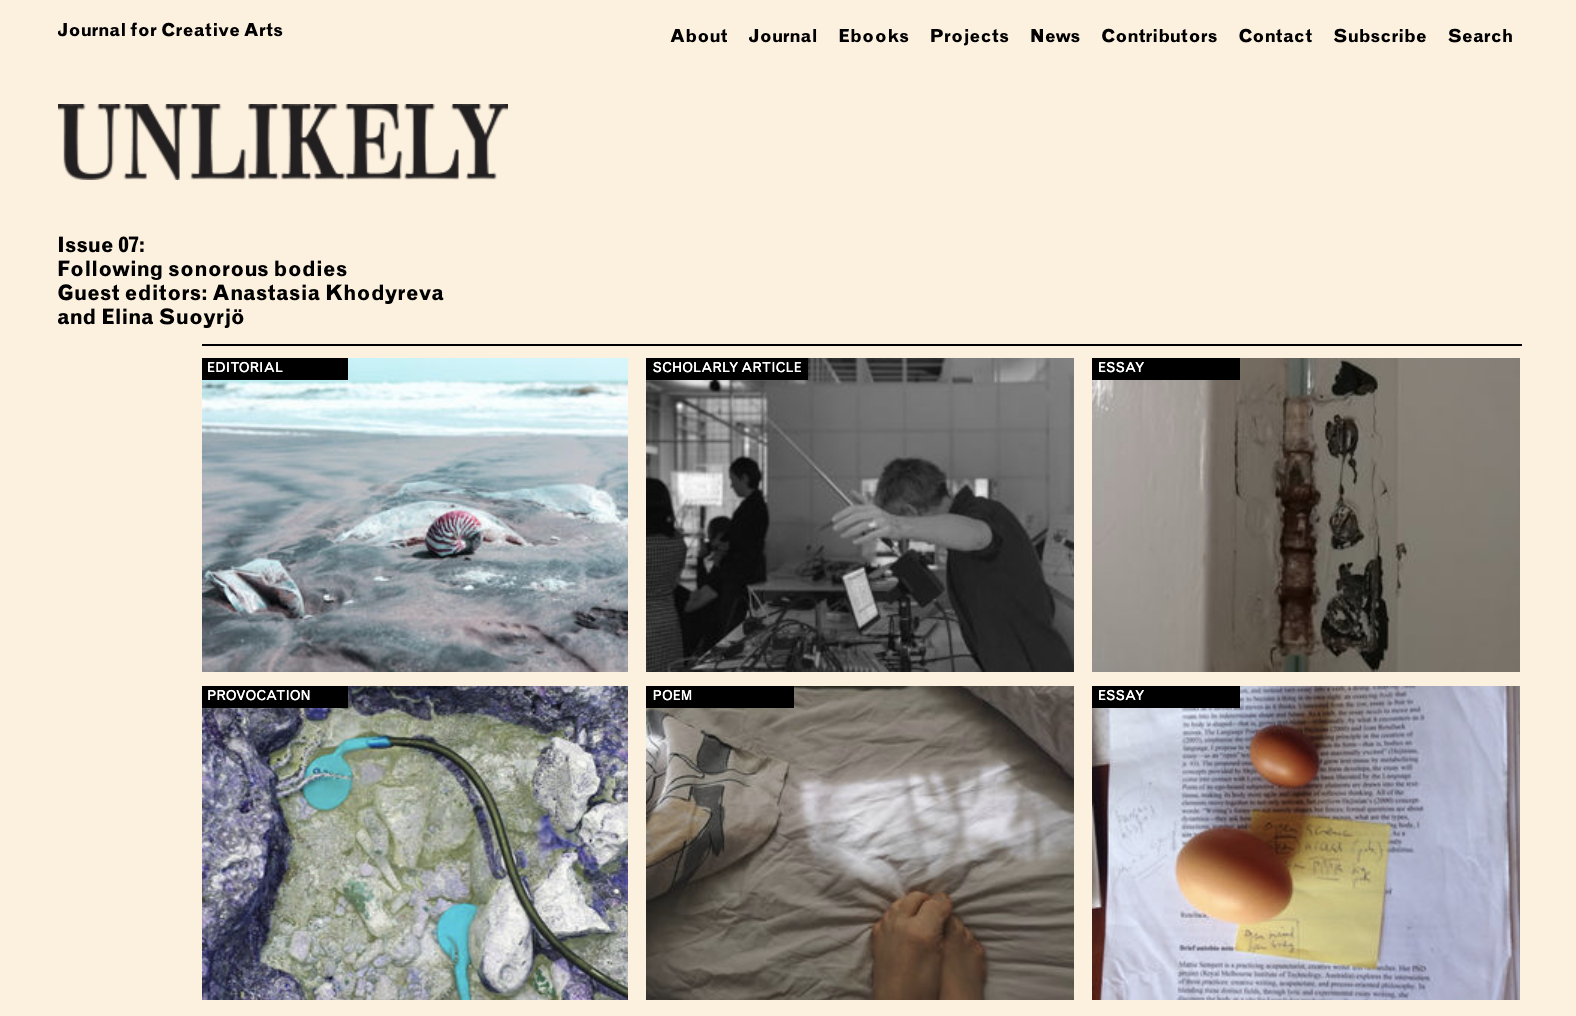 Screen shot of Unlikely Journal Issue 7 showing 6 of the contributors images